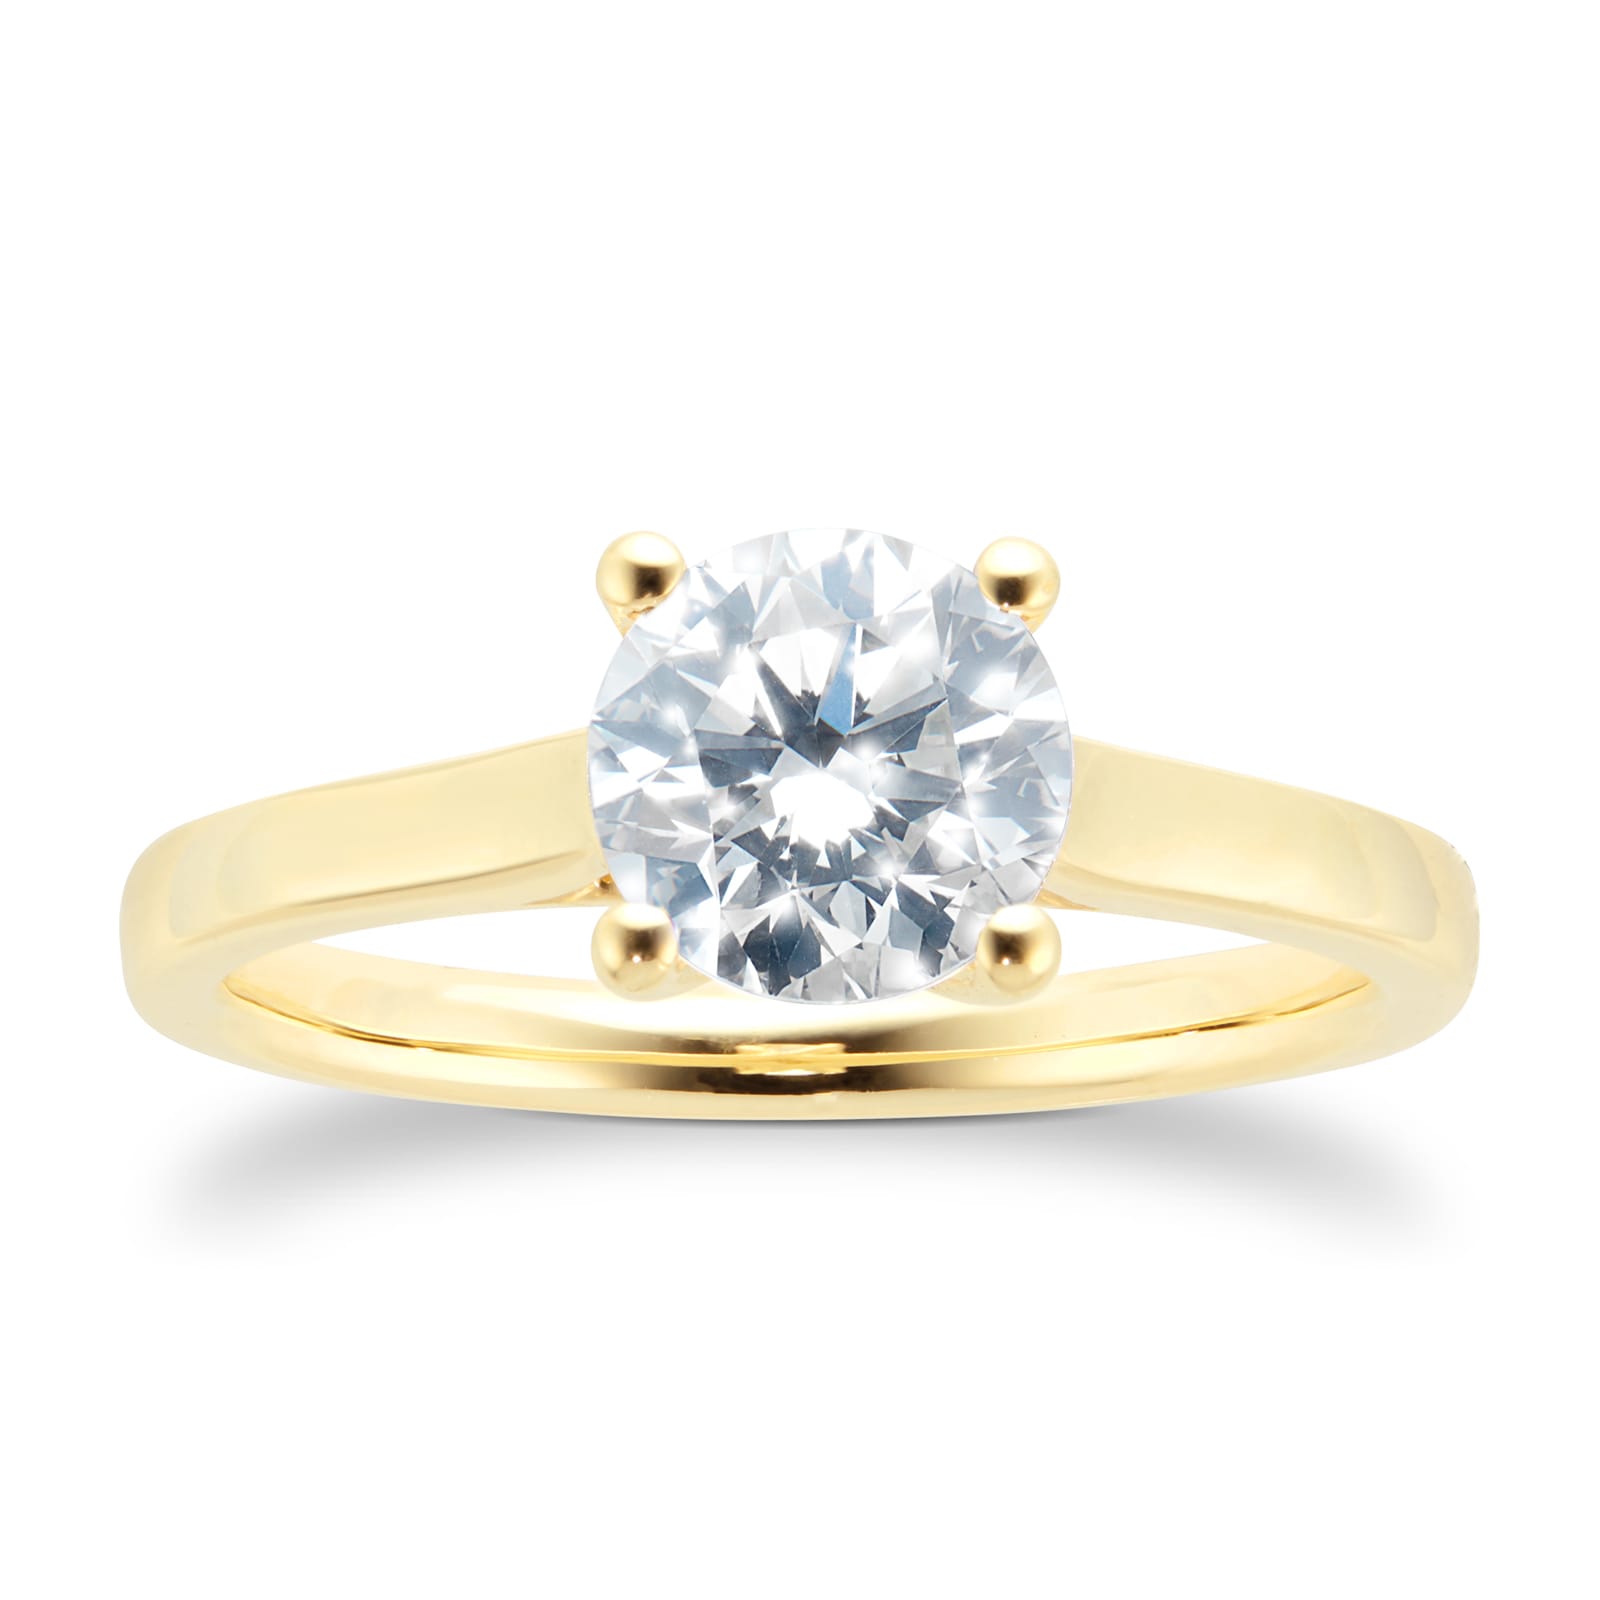 18ct Yellow Gold 1.50cttw Diamond Solitaire Engagement Ring - Ring Size Q